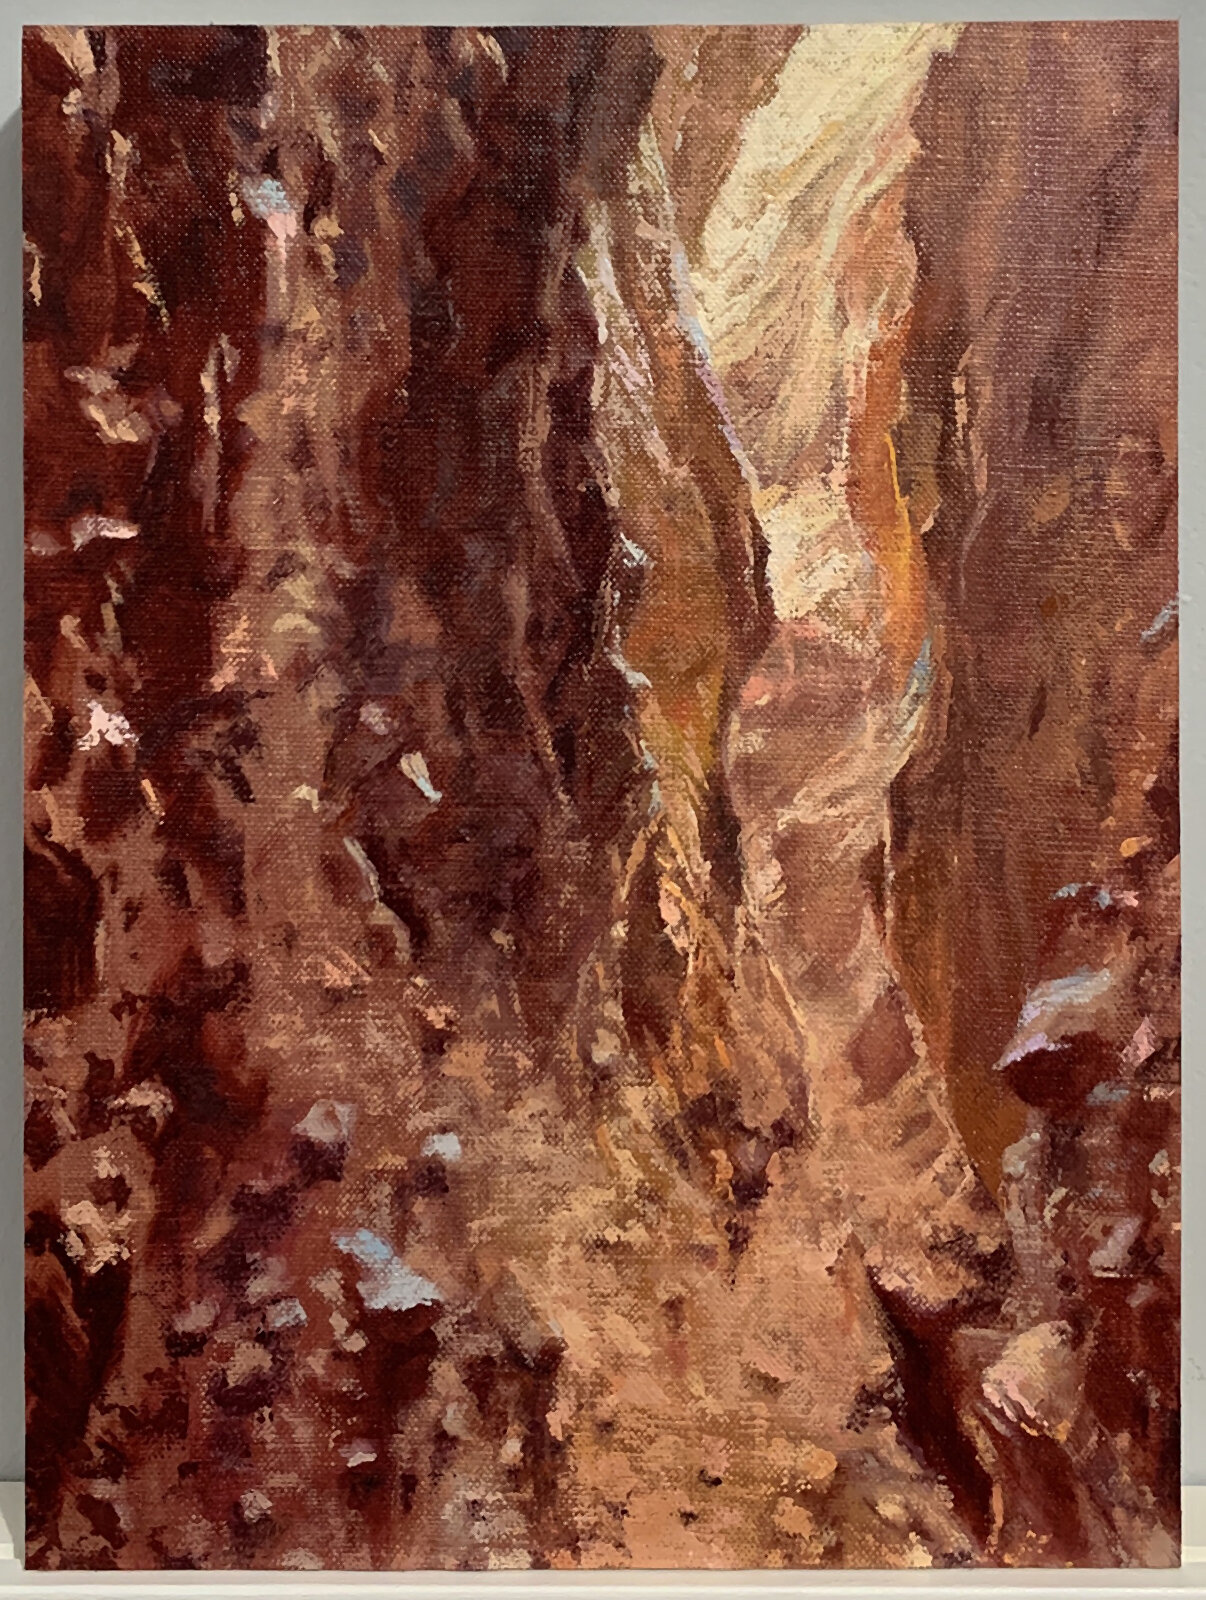   Sidewinder Canyon 1,  2020 oil on linen on panel 